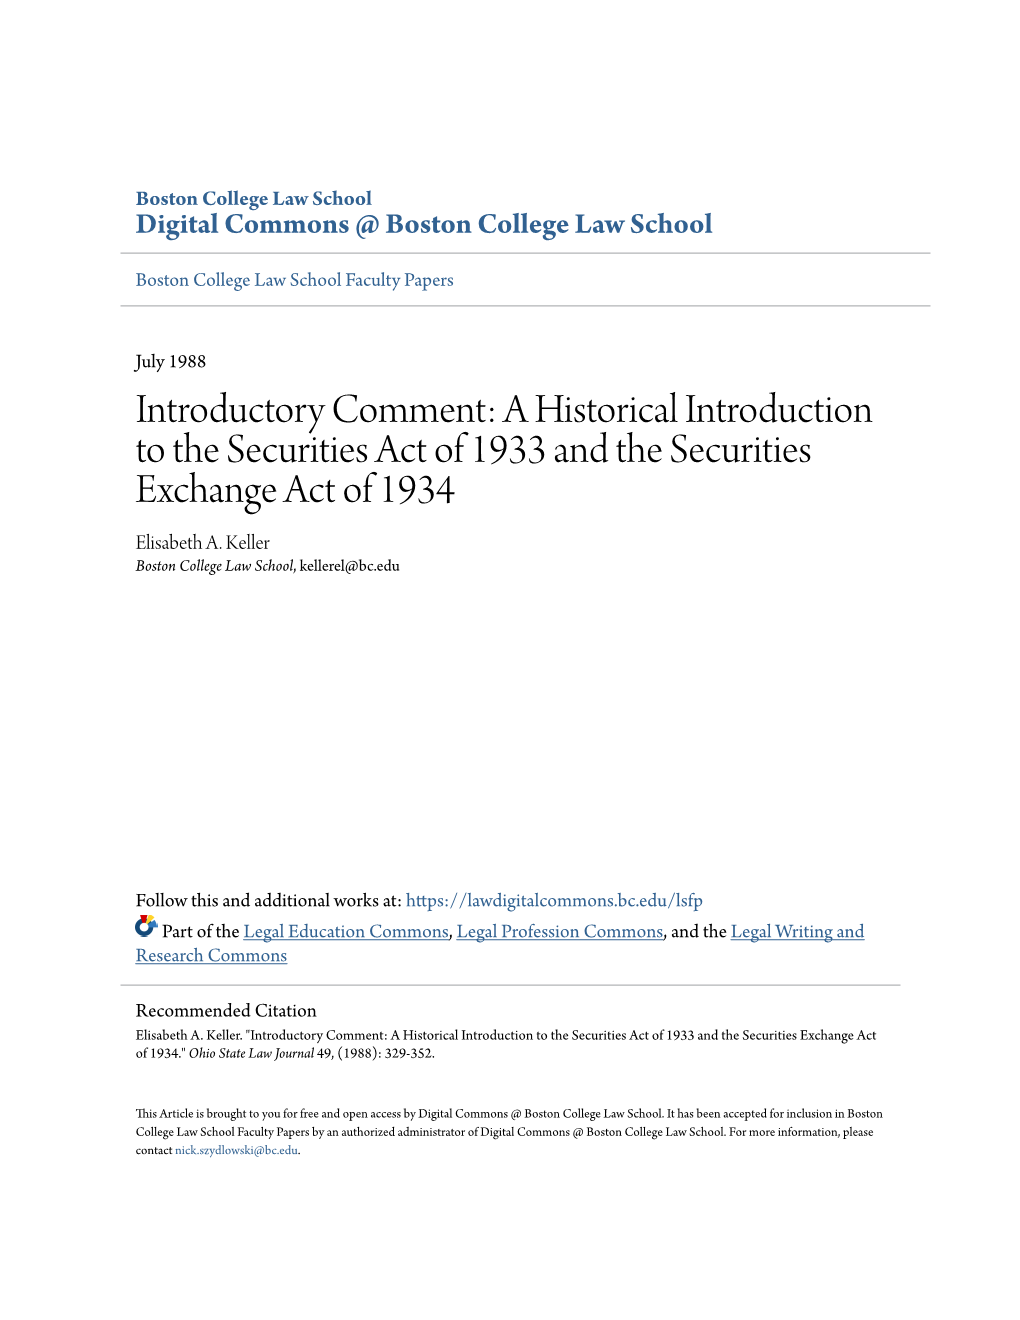 Introductory Comment: a Historical Introduction to the Securities Act of 1933 and the Securities Exchange Act of 1934 Elisabeth A